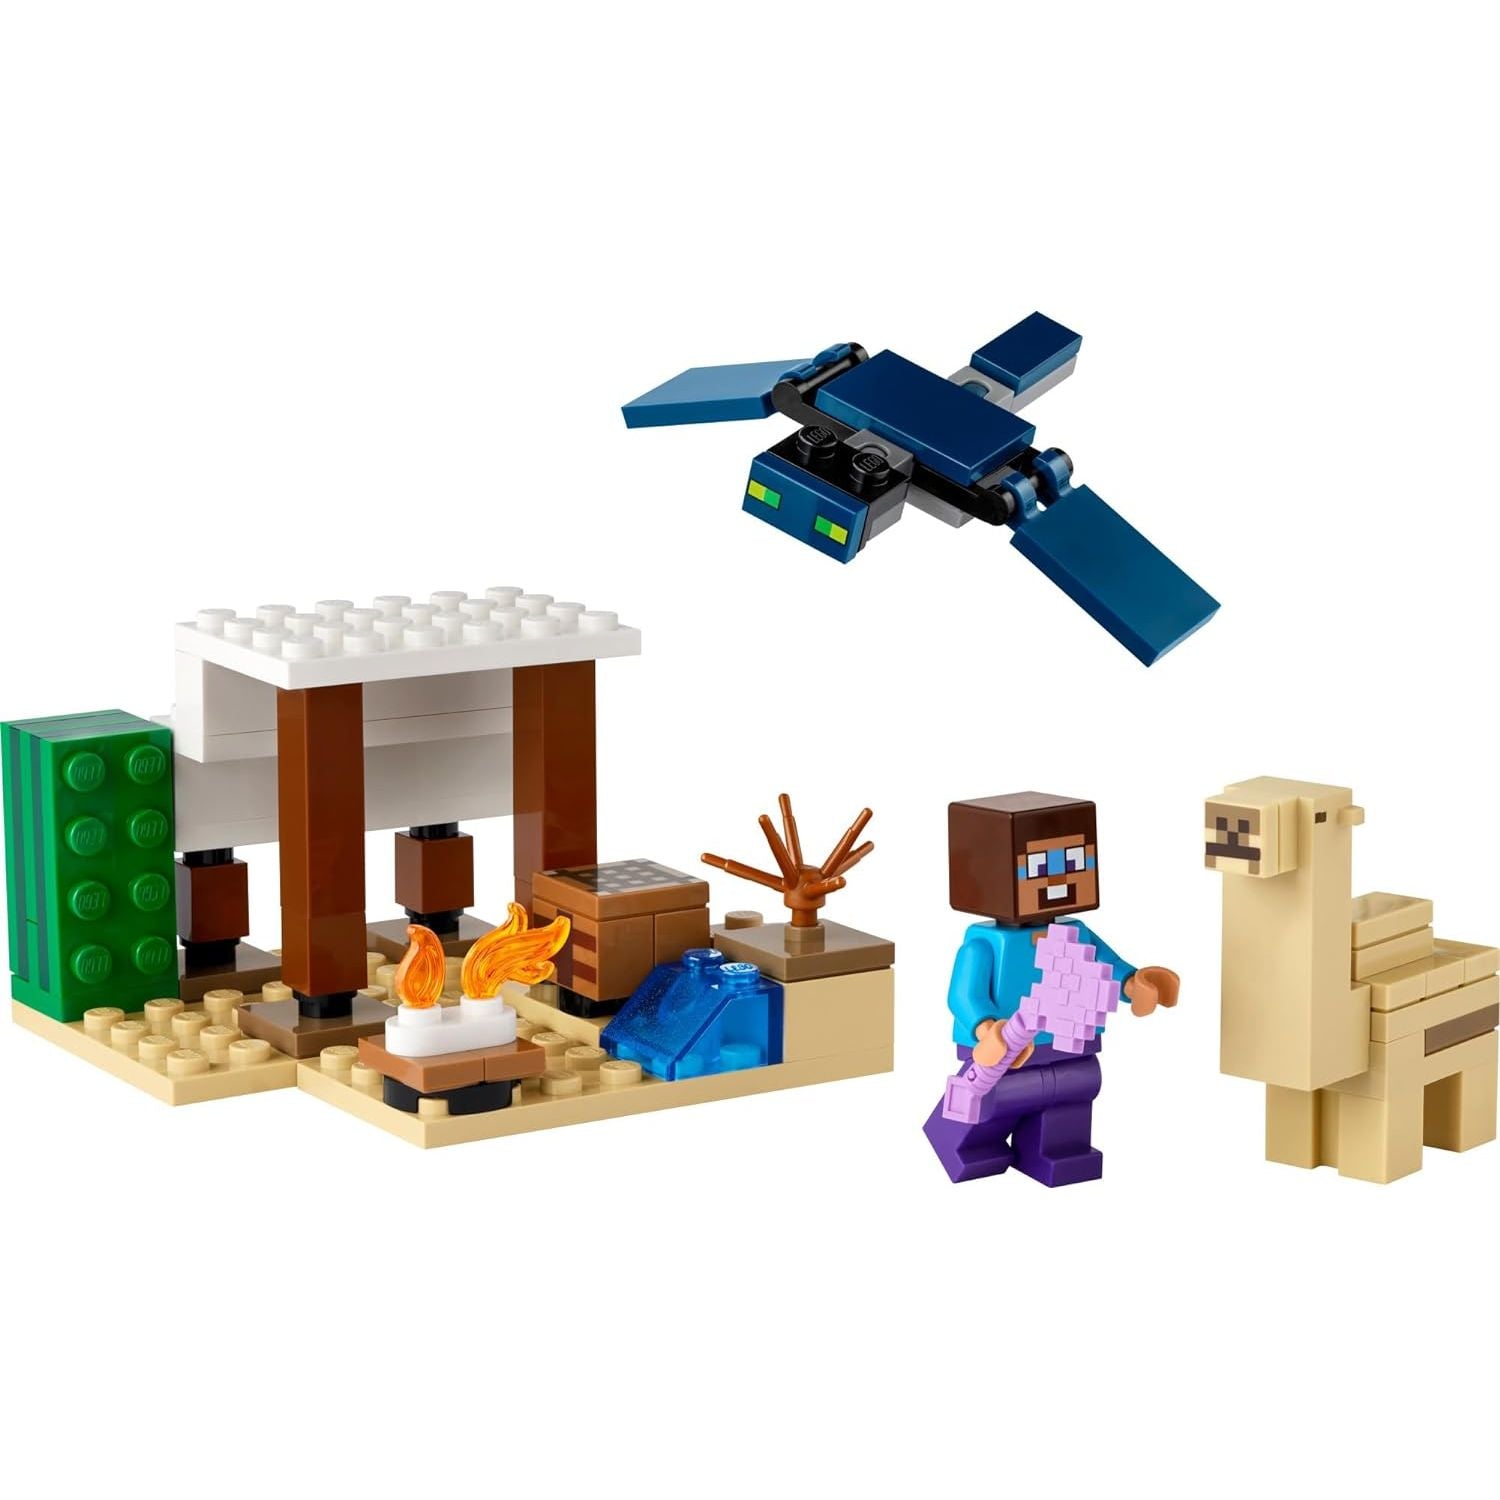 LEGO 21251 Minecraft Steve's Desert Expedition Building Toy, Biome with Minecraft House and Action Figures, Minecraft Gift for Independent Play.